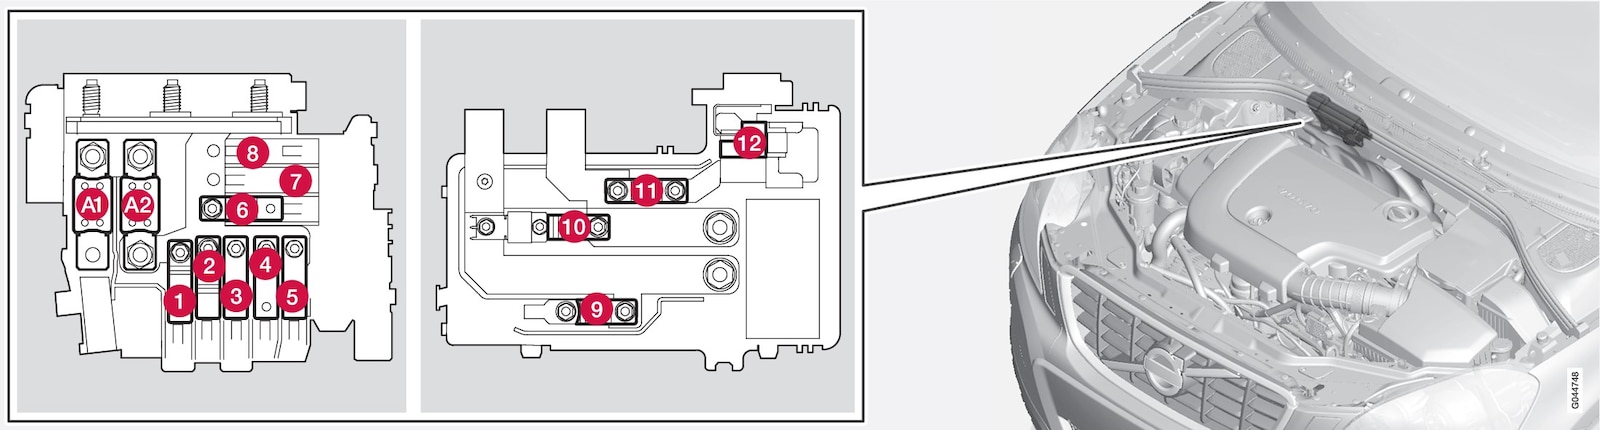 Location of fuses for the Start/Stop function.